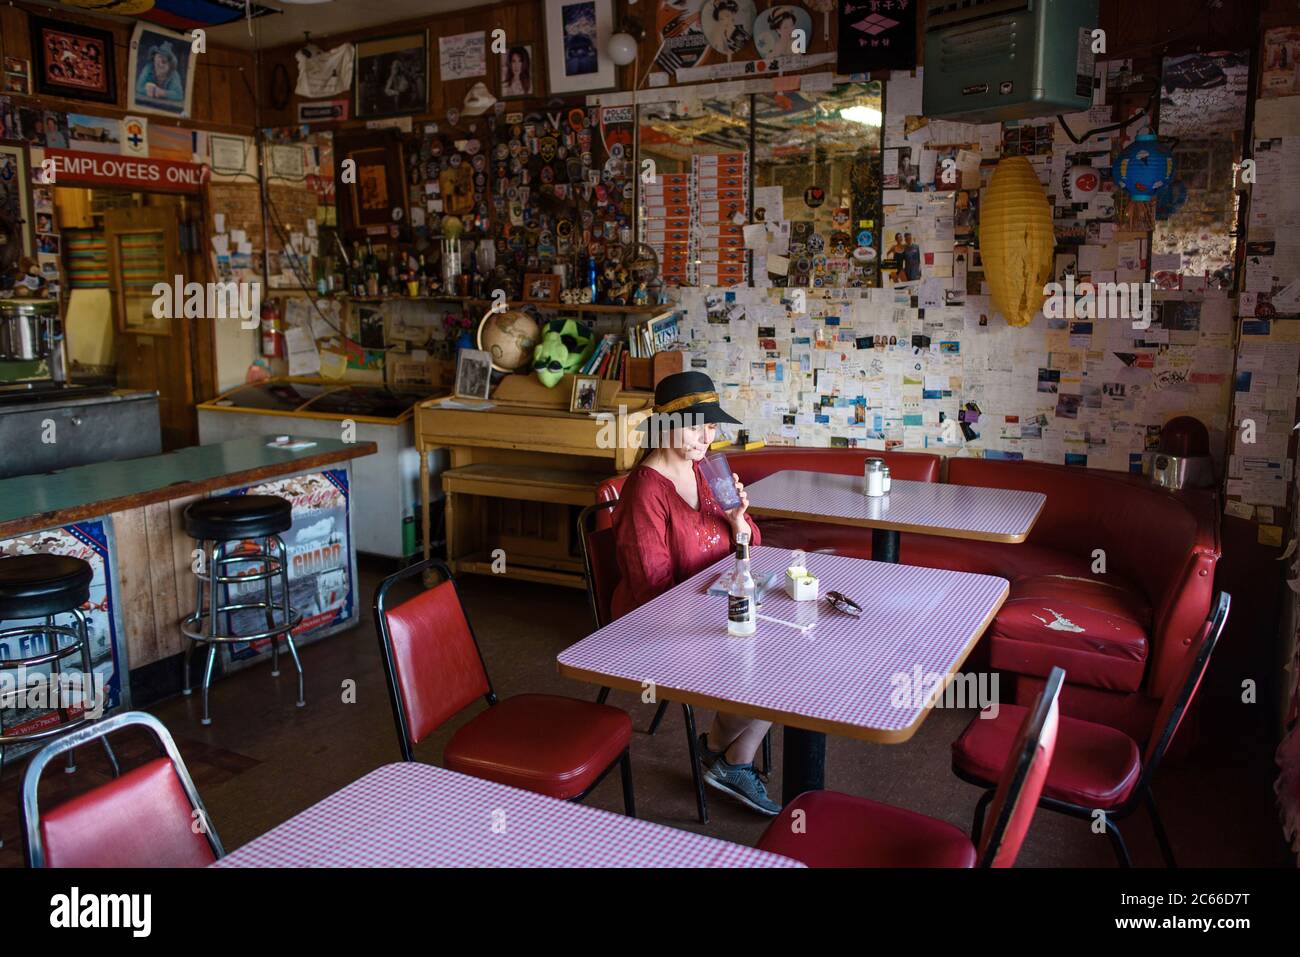 Tourist inside Bagdad Cafe in California, USA Stock Photo